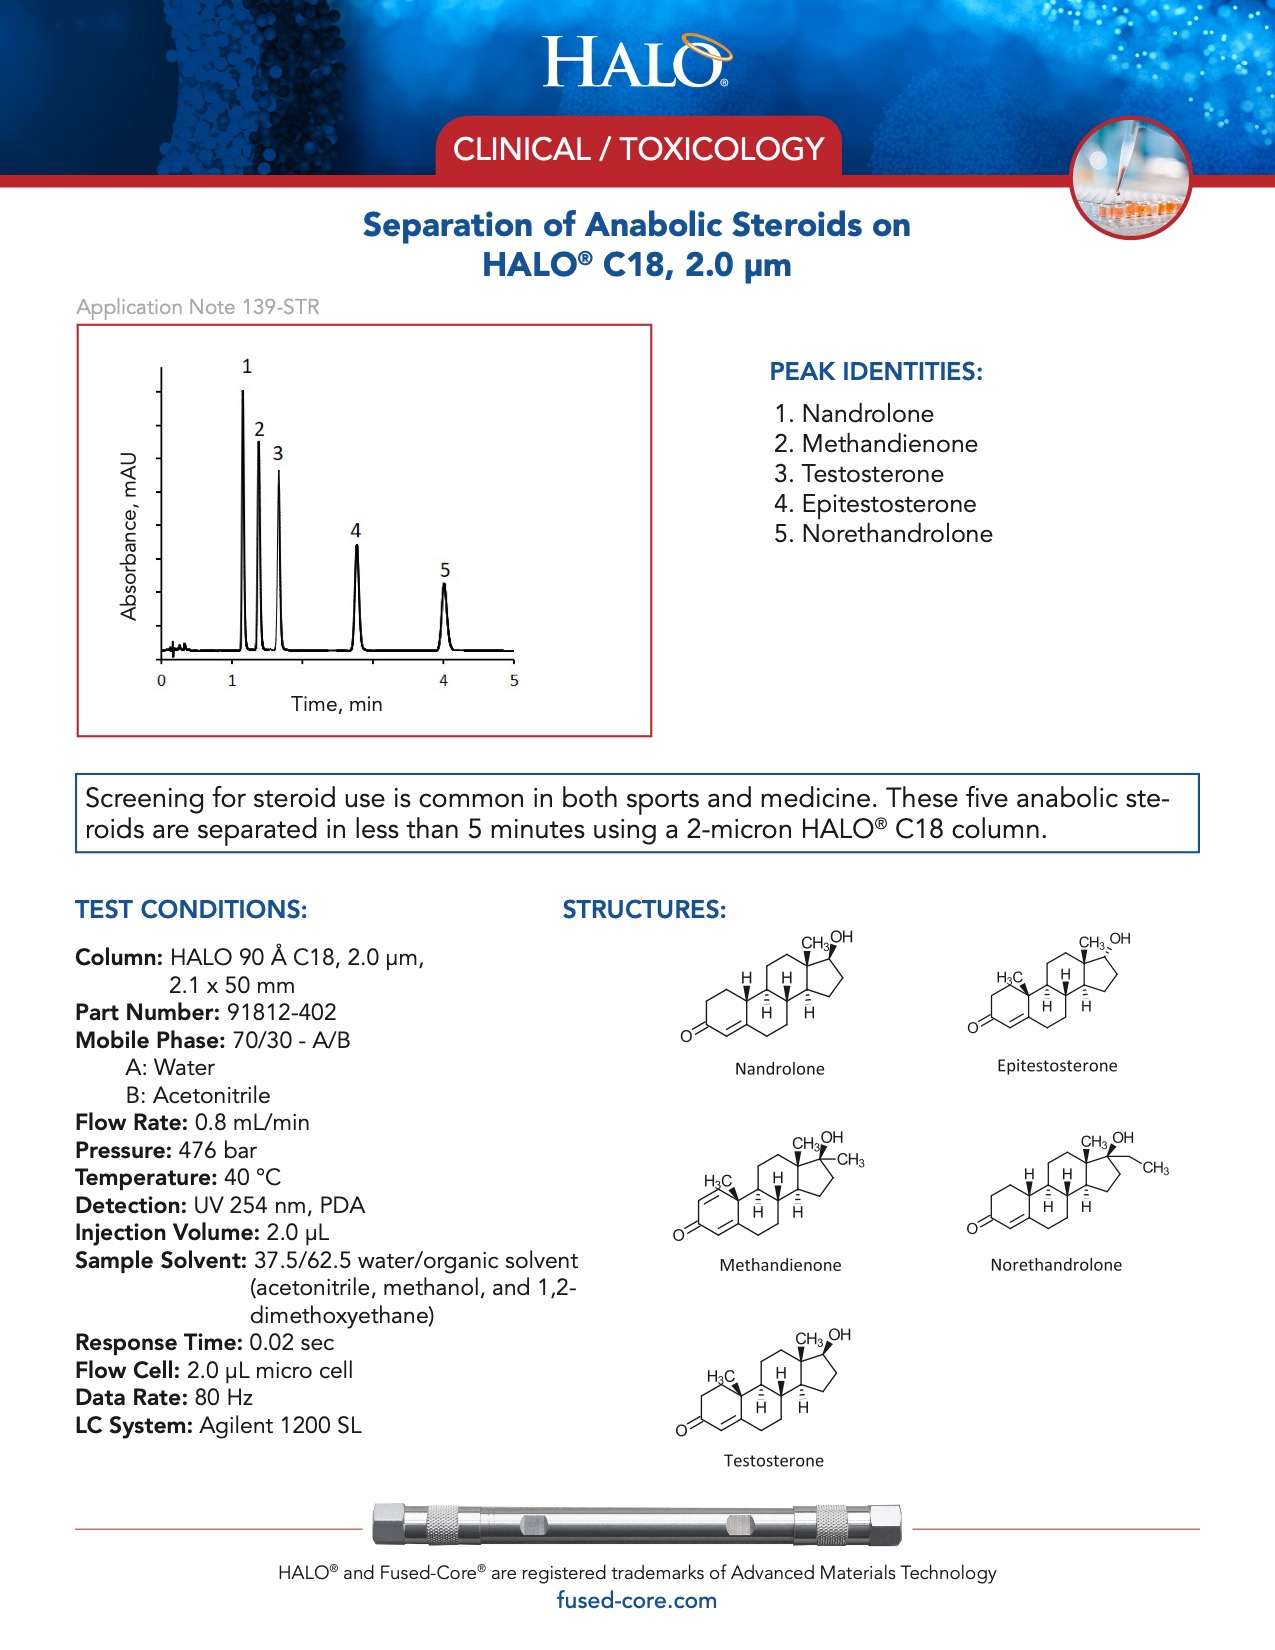 clinical toxicology testing - separation of anabolic steroids on c18 column